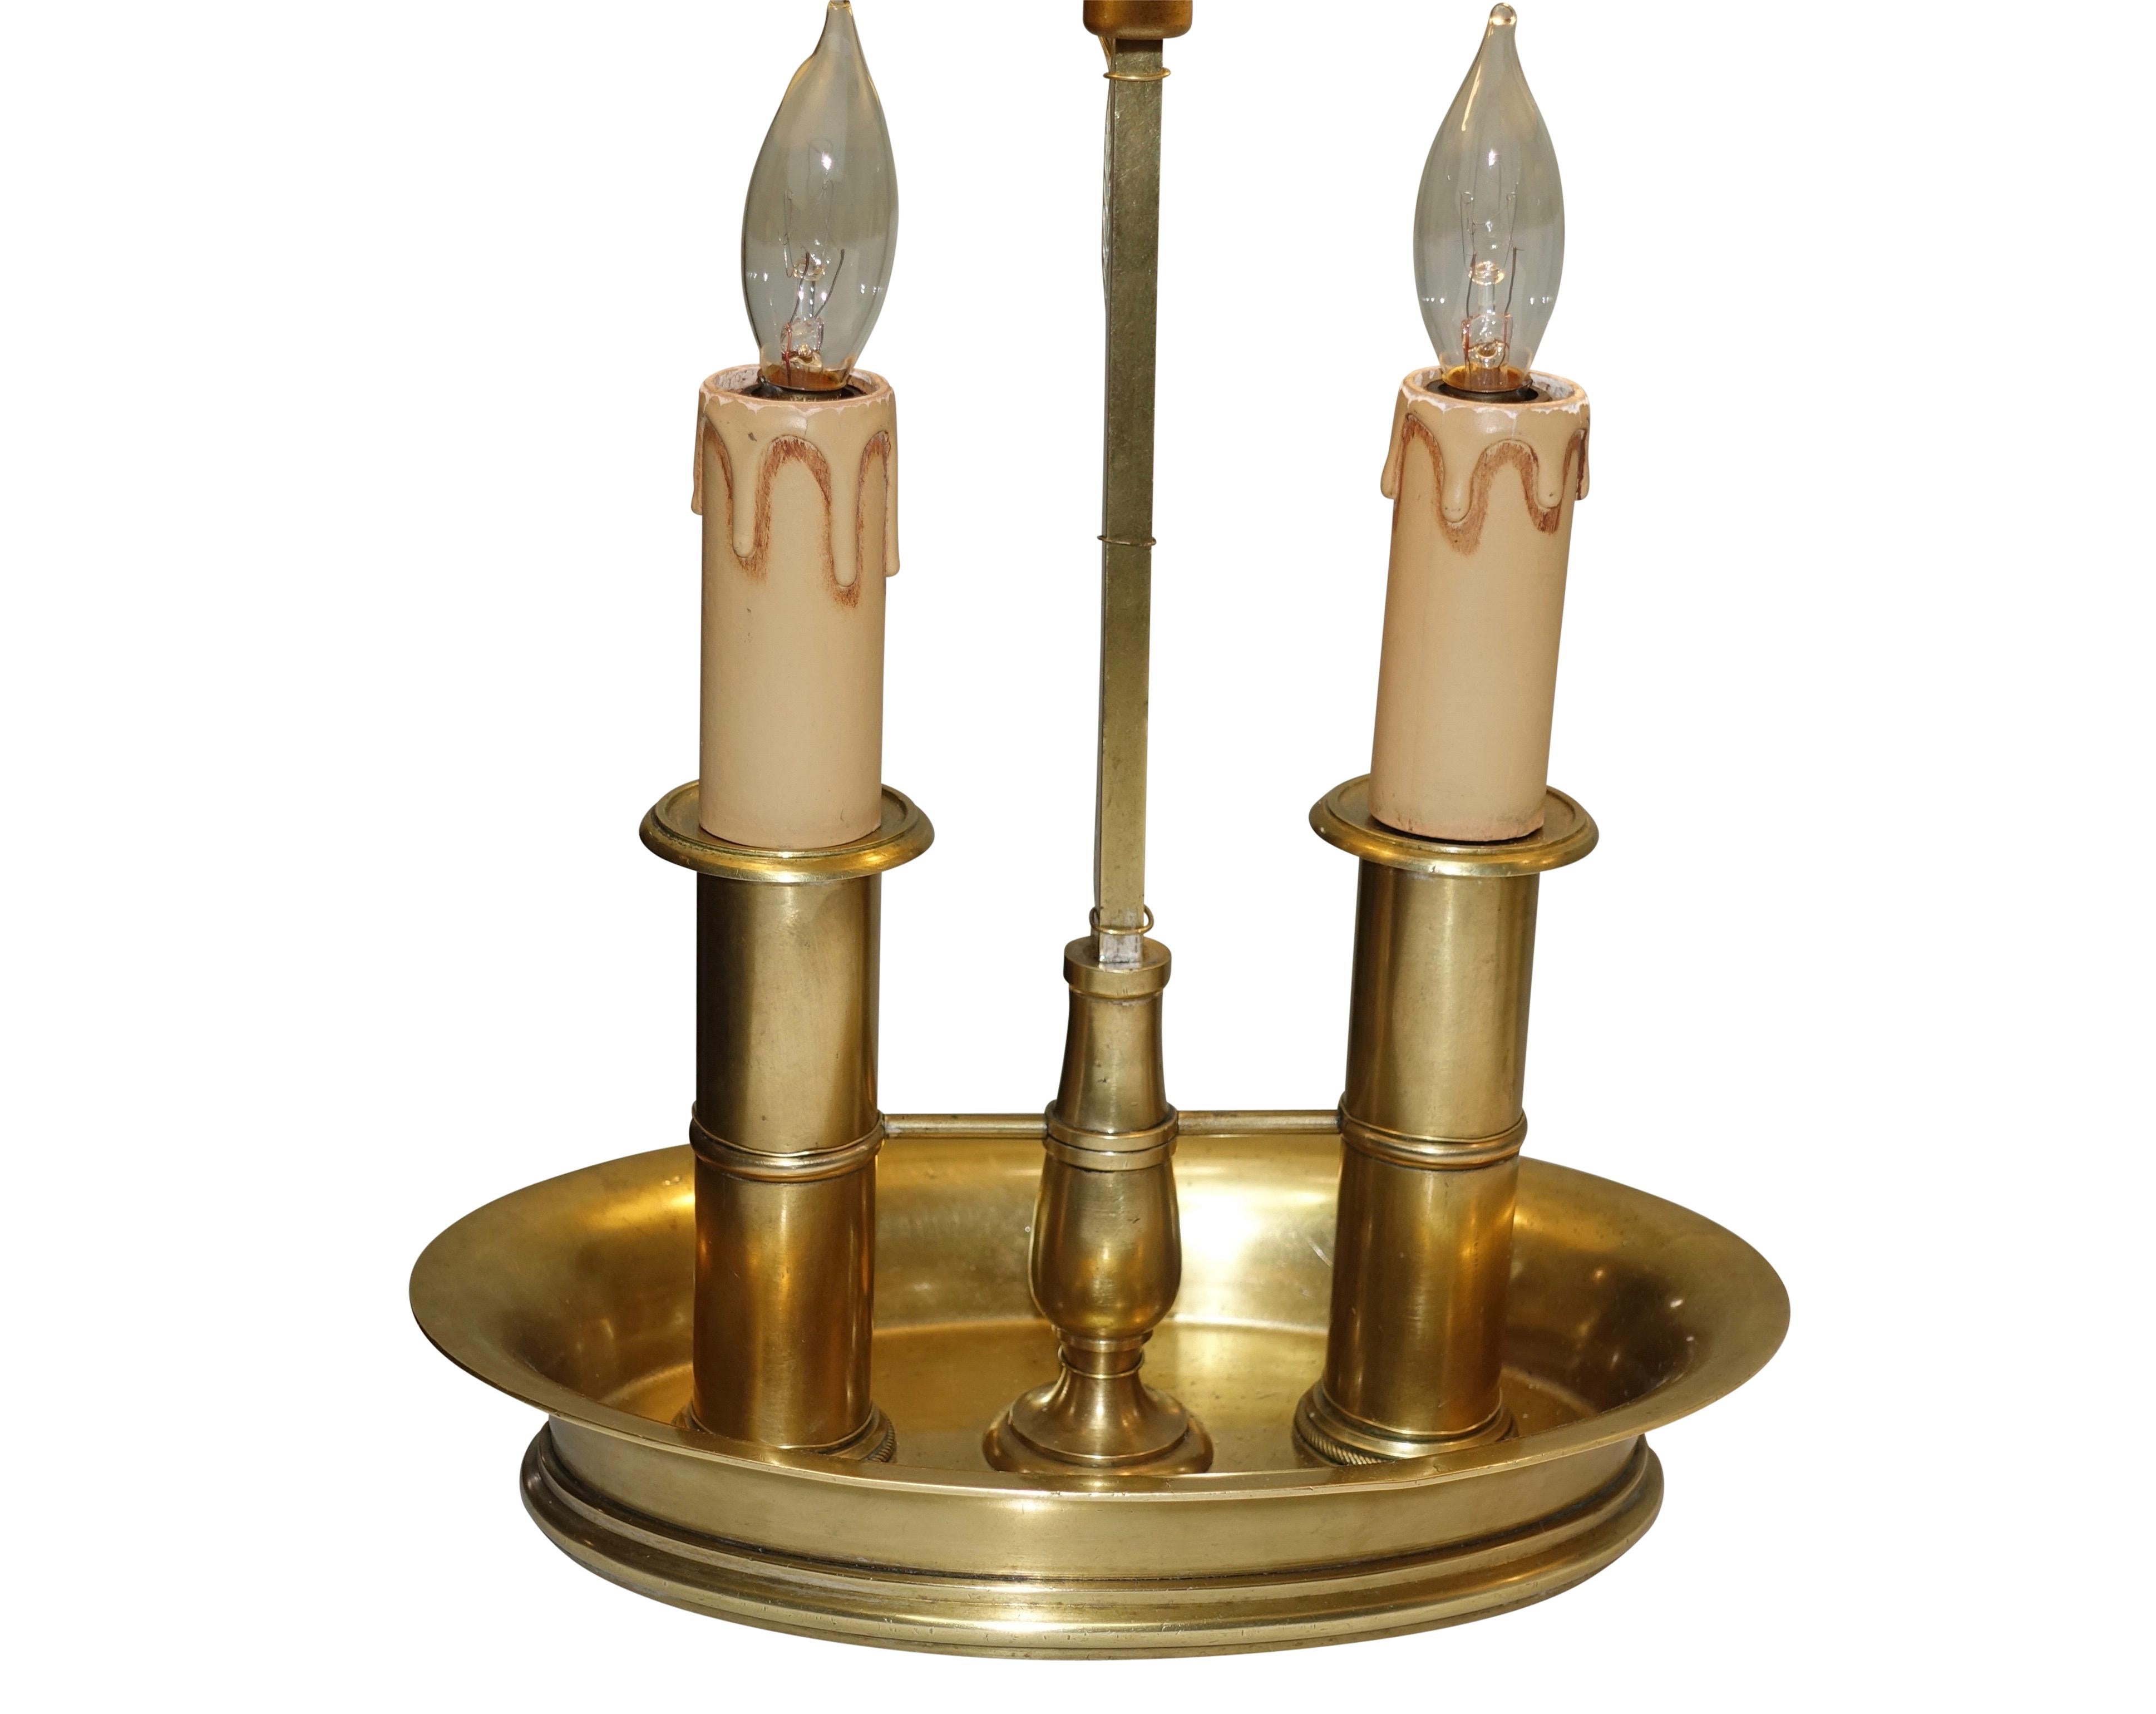 Pair of Brass Bouilotte Lamps with Yellow Tole Shades, French Early 19th Century (19. Jahrhundert)